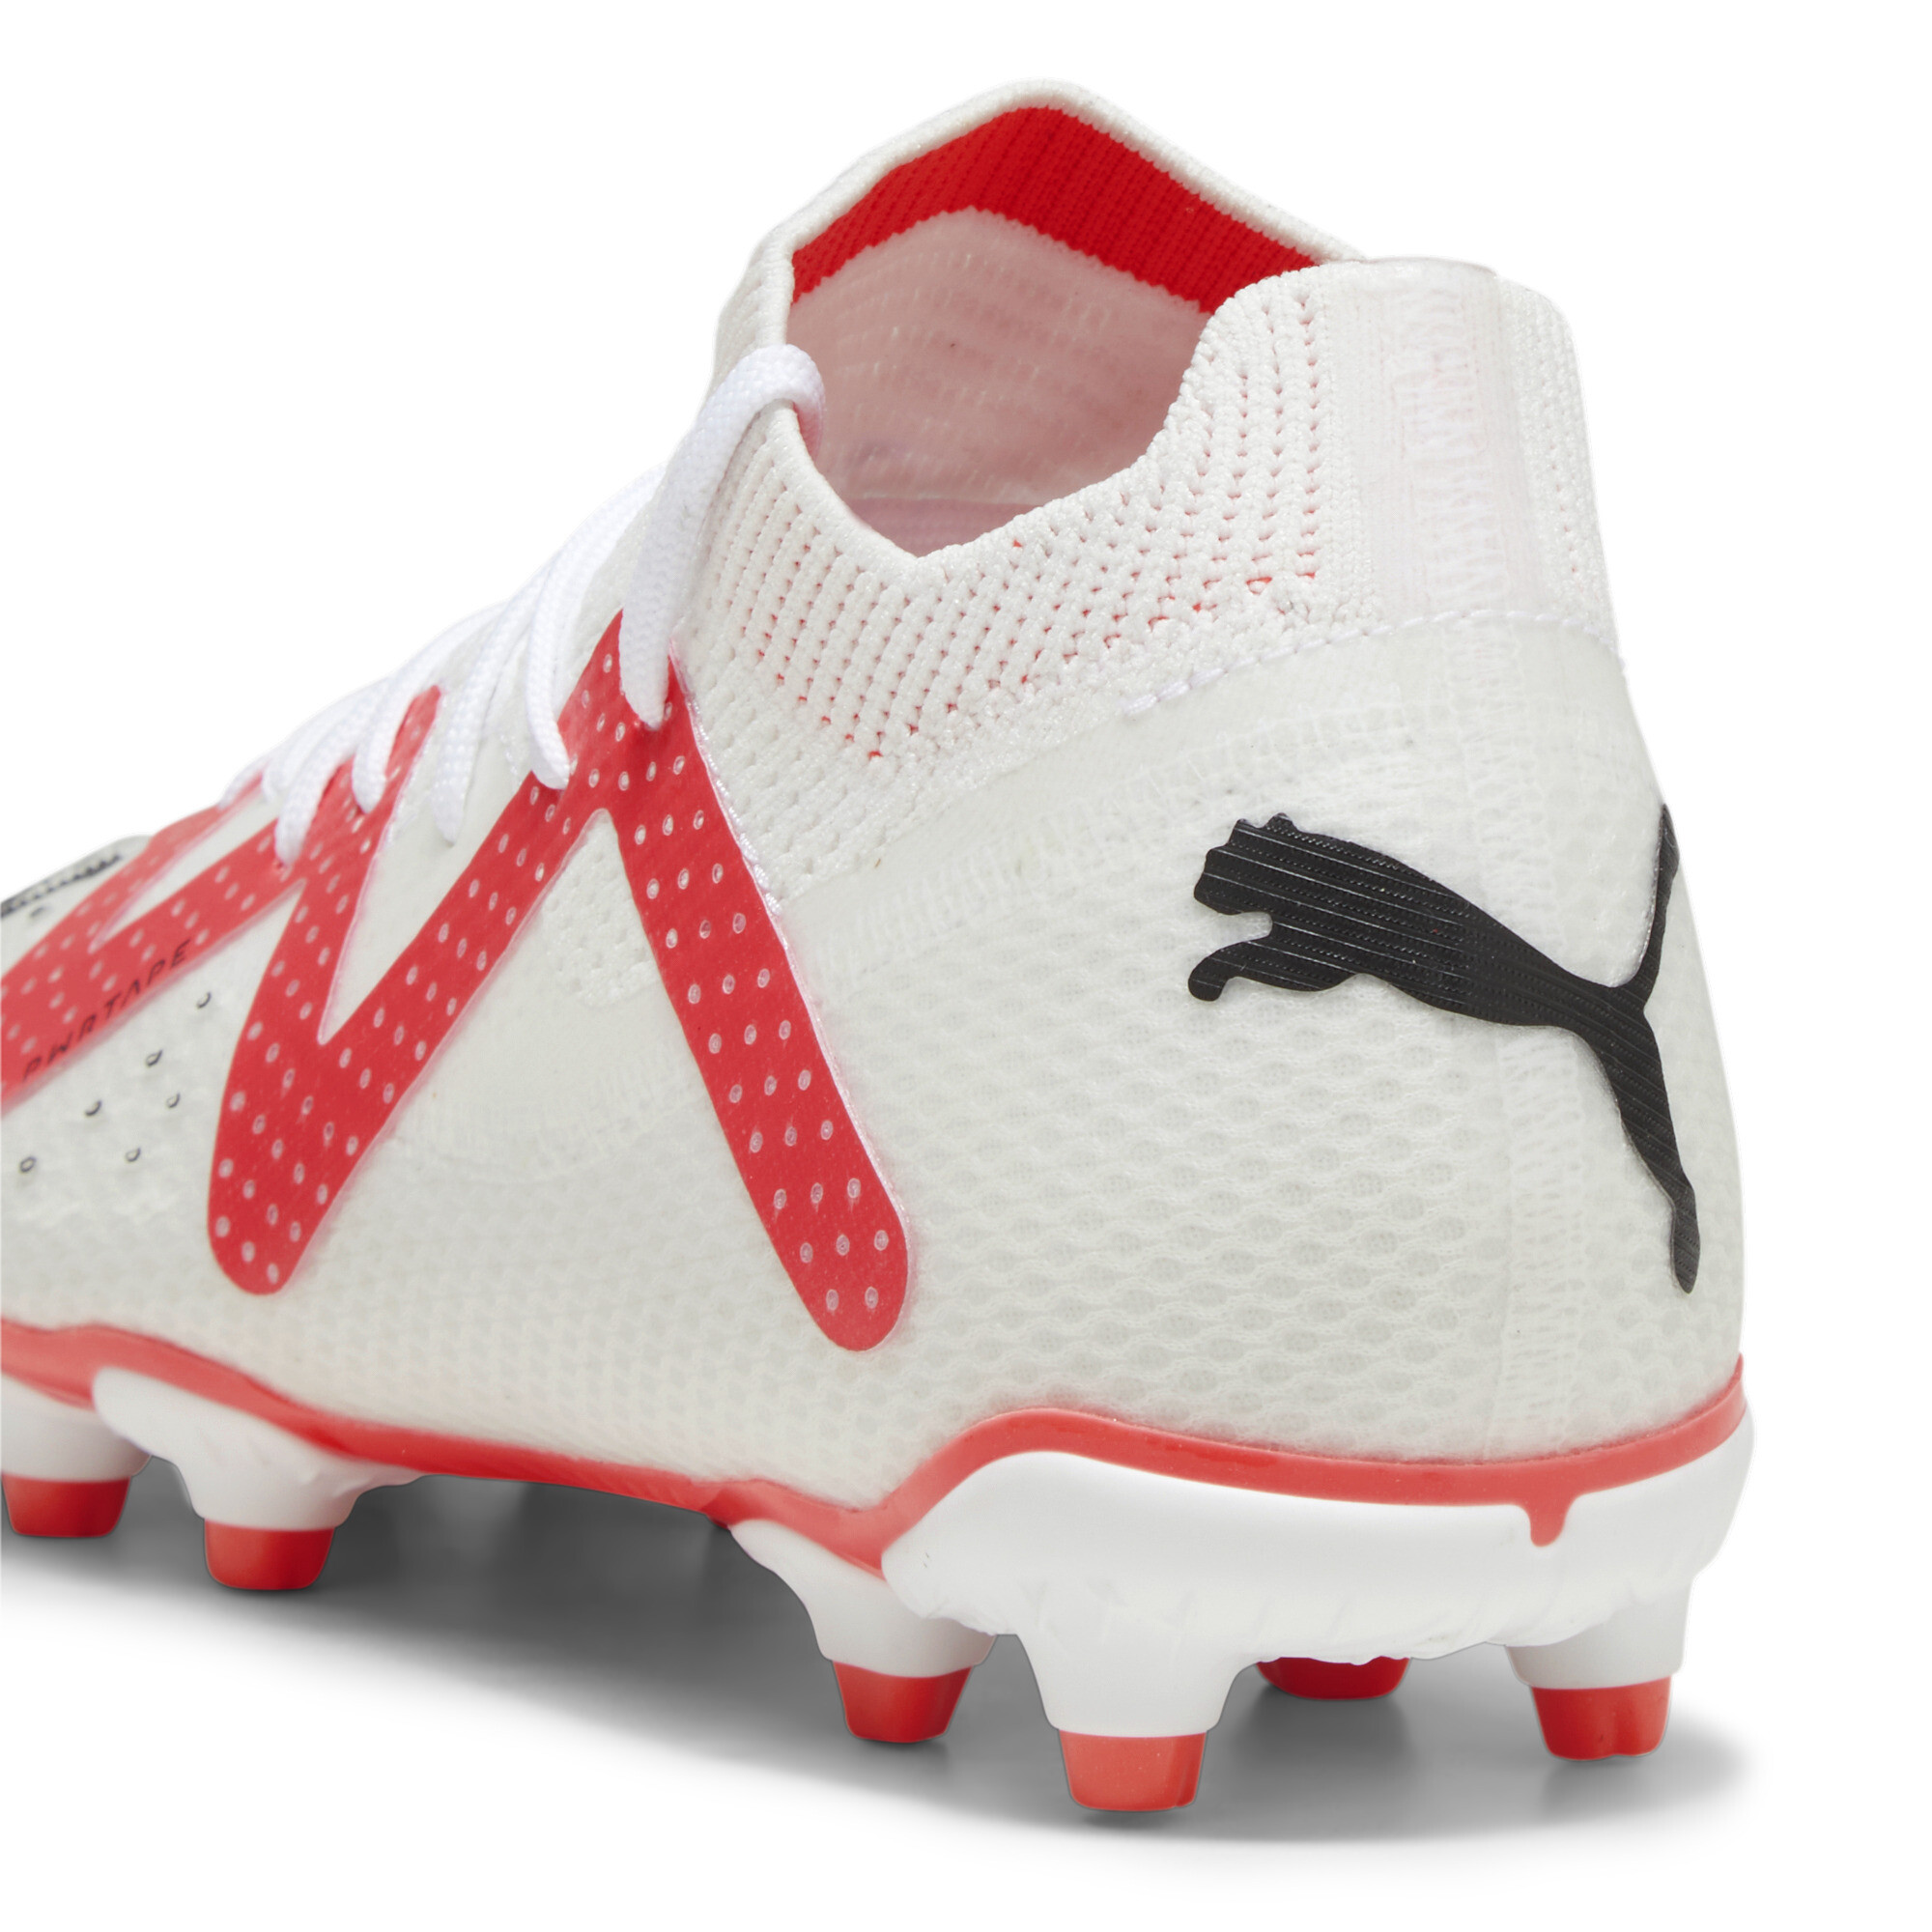 Puma FUTURE PRO FG/AG Youth Football Boots, White, Size 35, Shoes